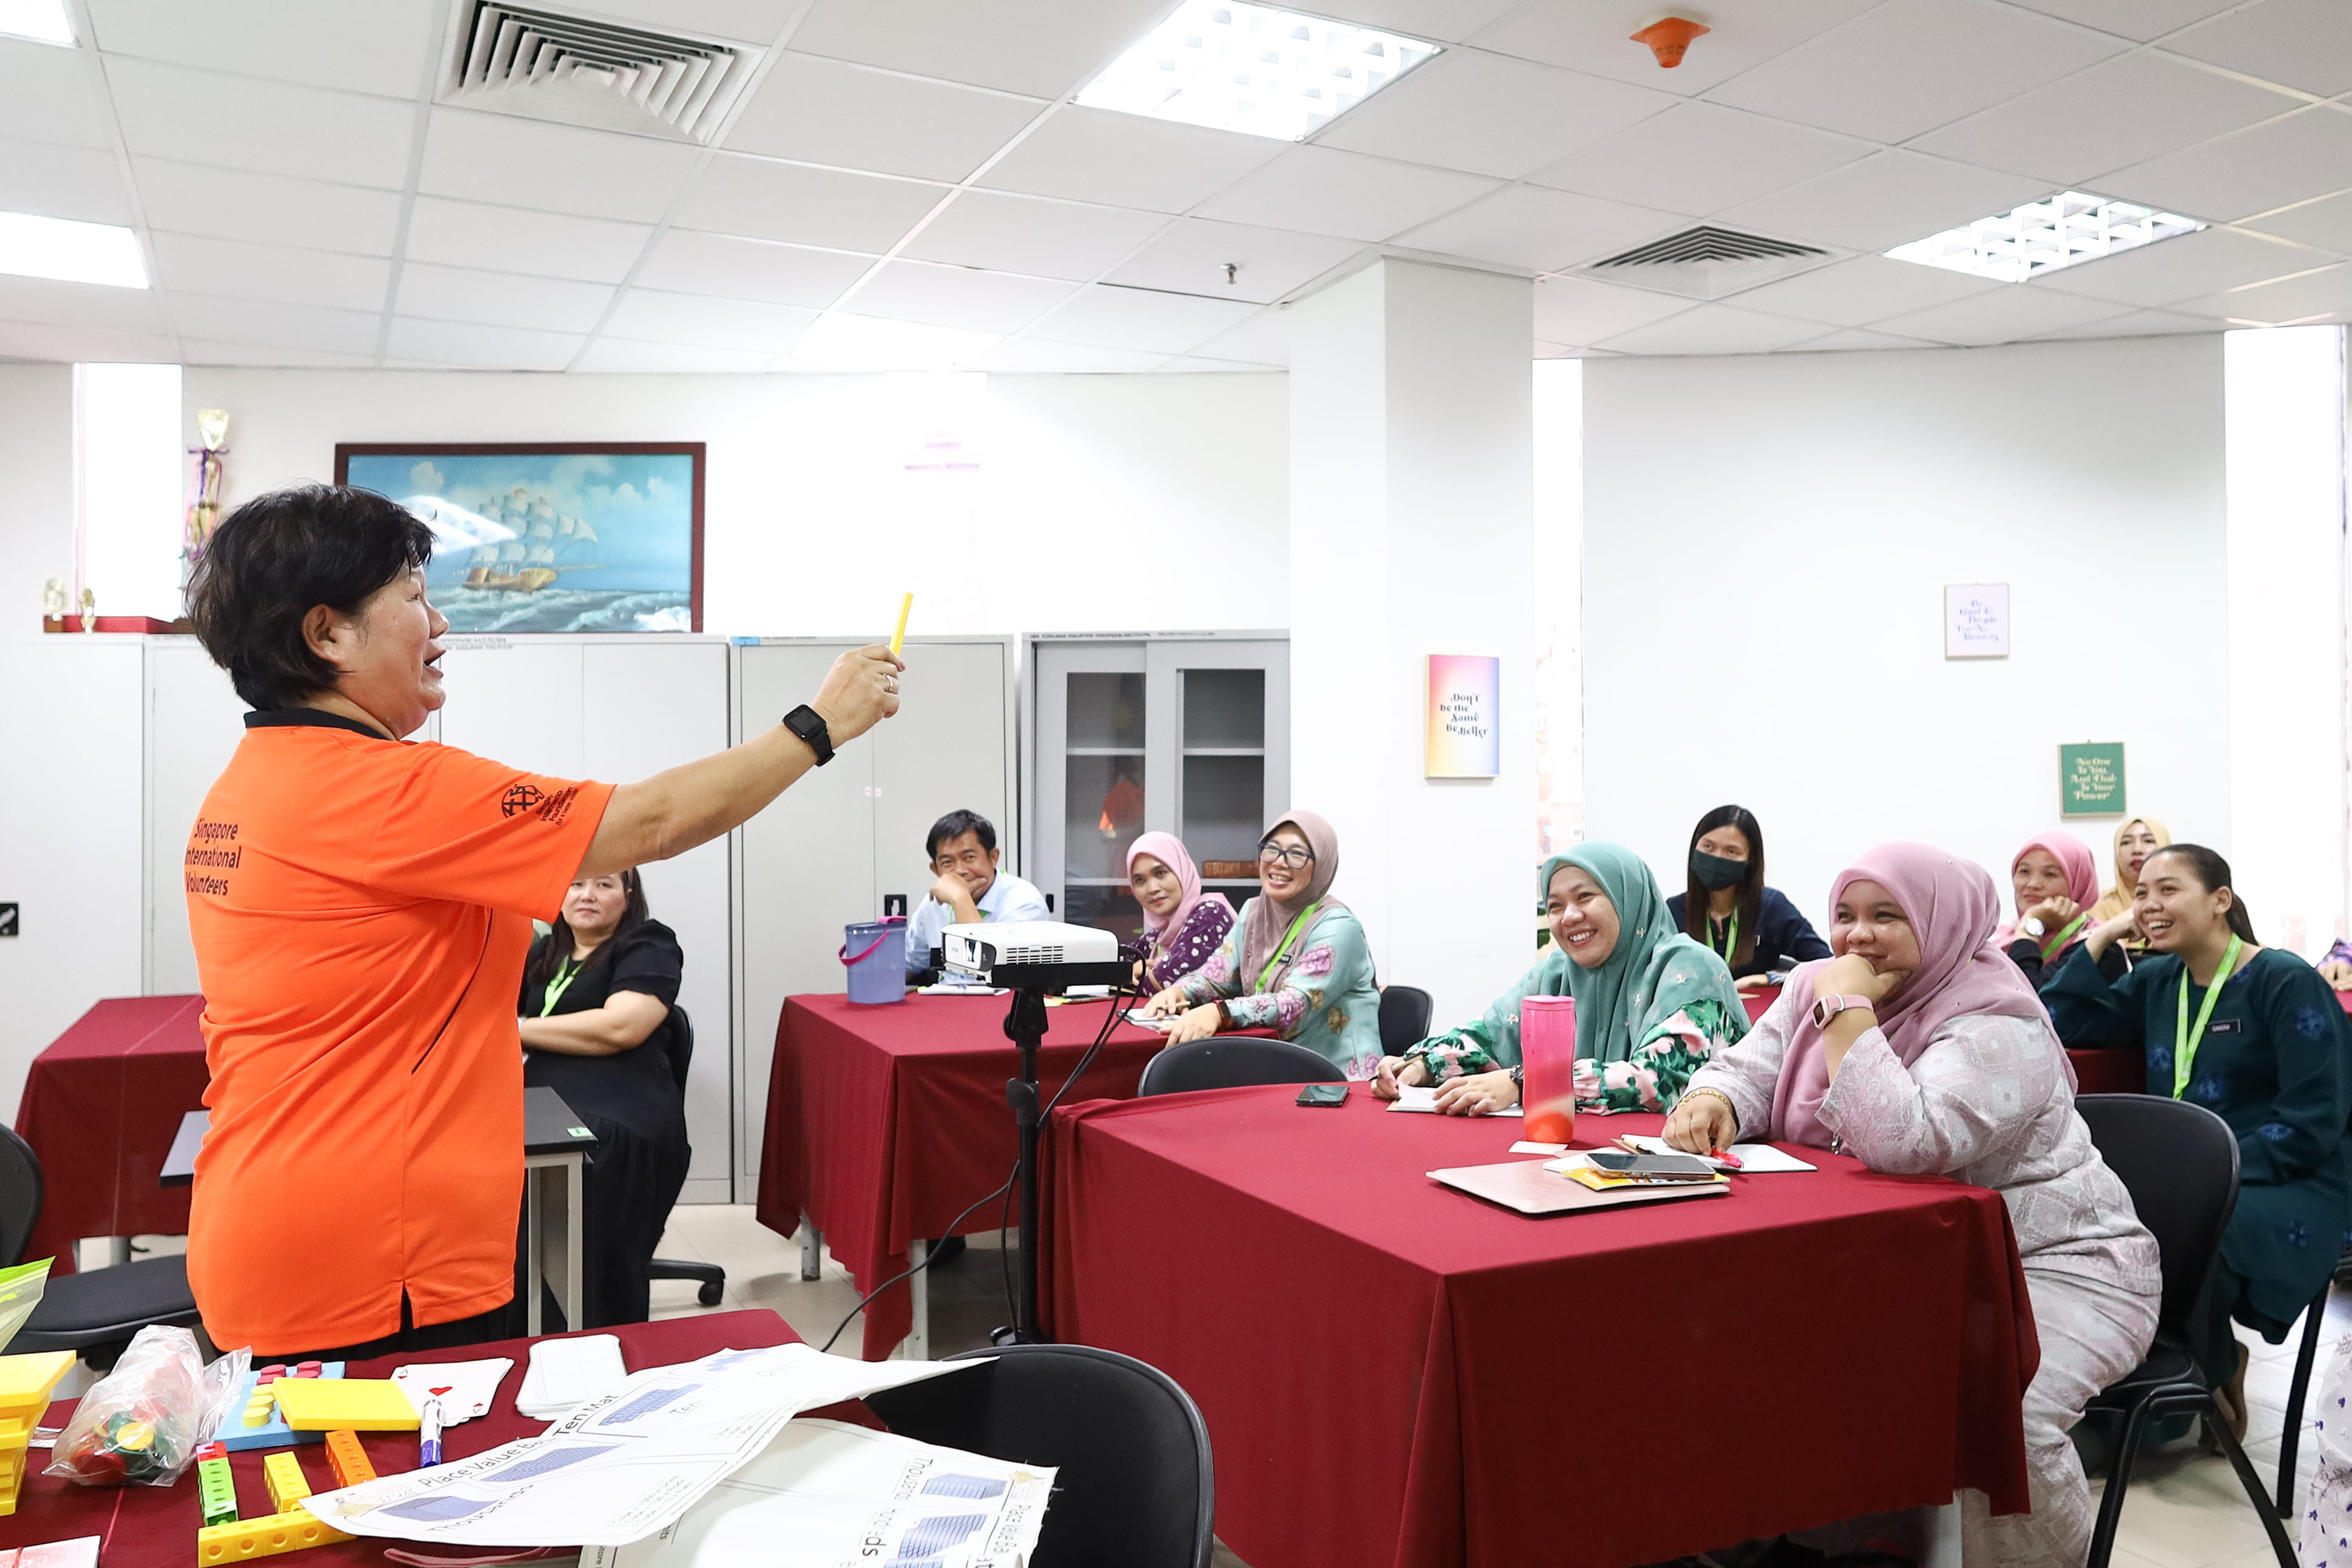 SIV Ms Juliana Donna Loh (in orange) demonstrating the use of Base Ten Blocks, an educational tool that helps students to visualize numbers